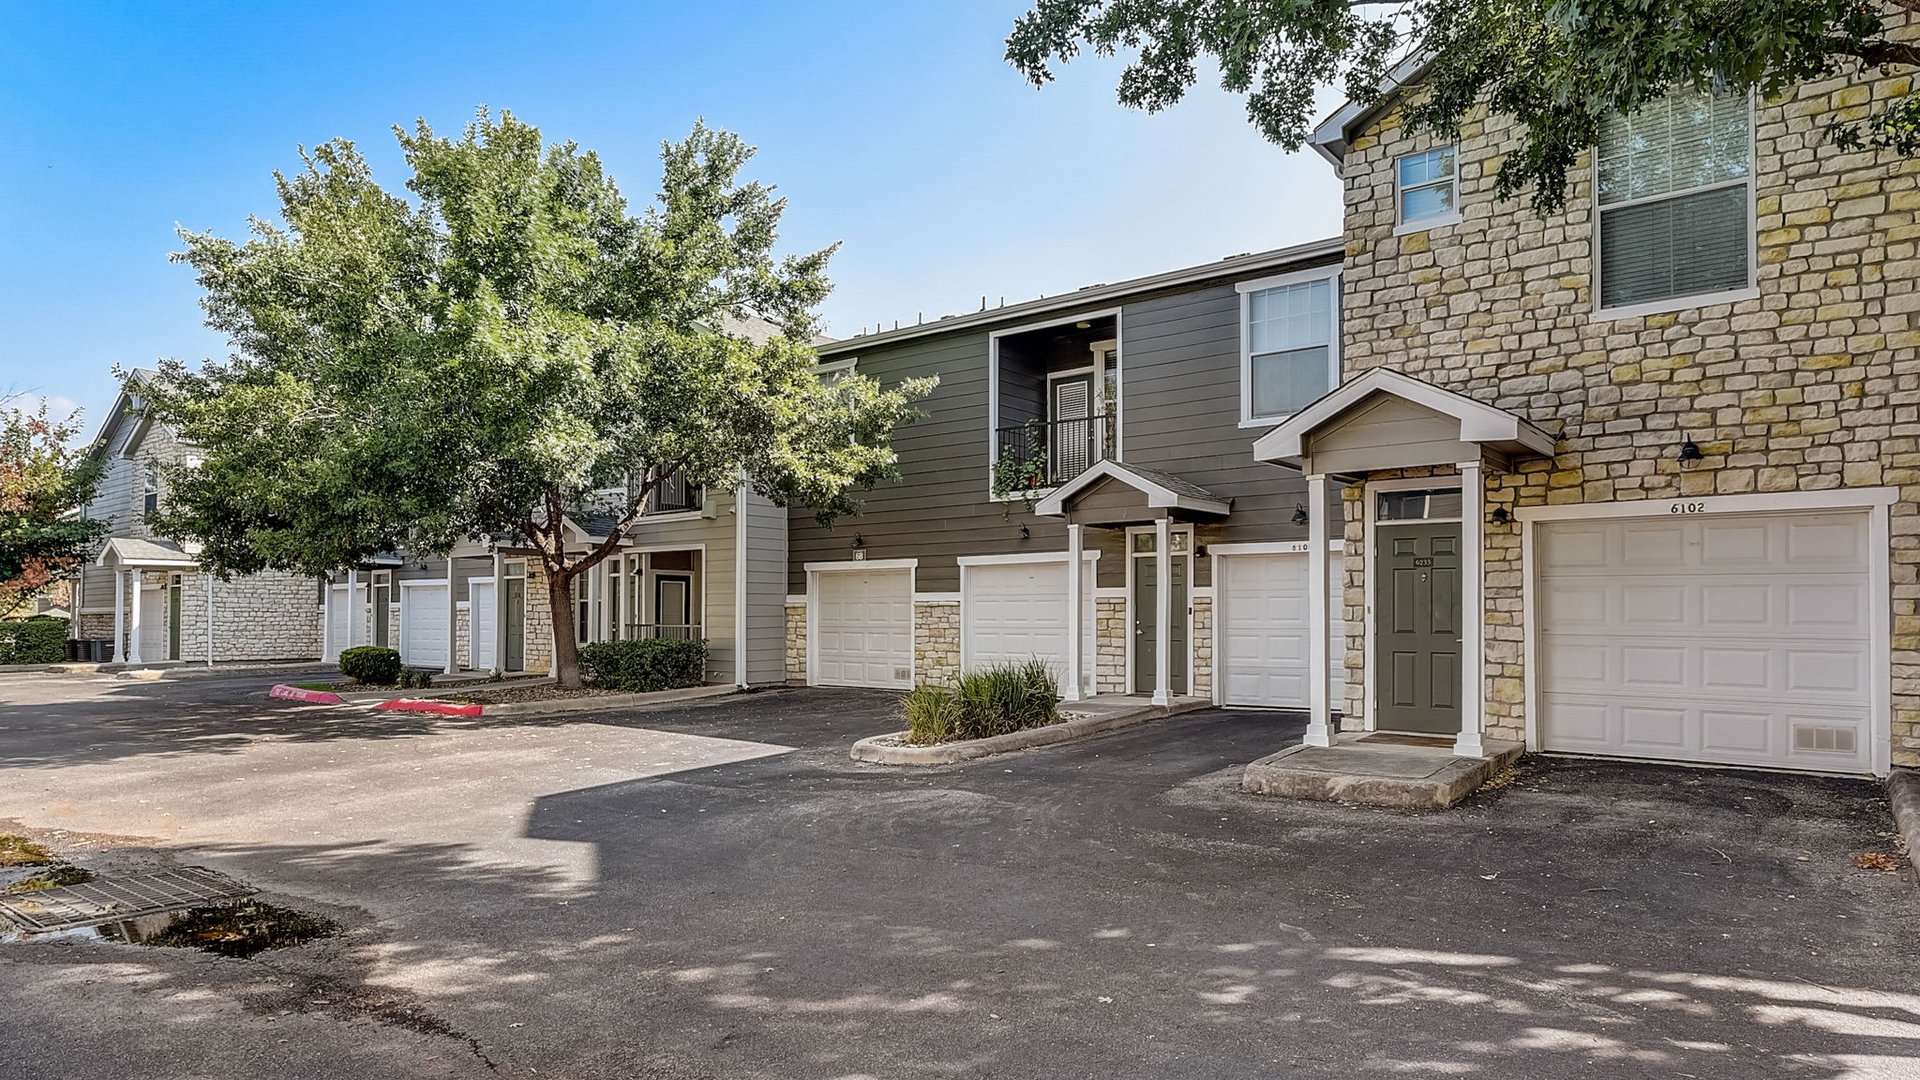 Townhome style living at Springs at Live Oak Apartments